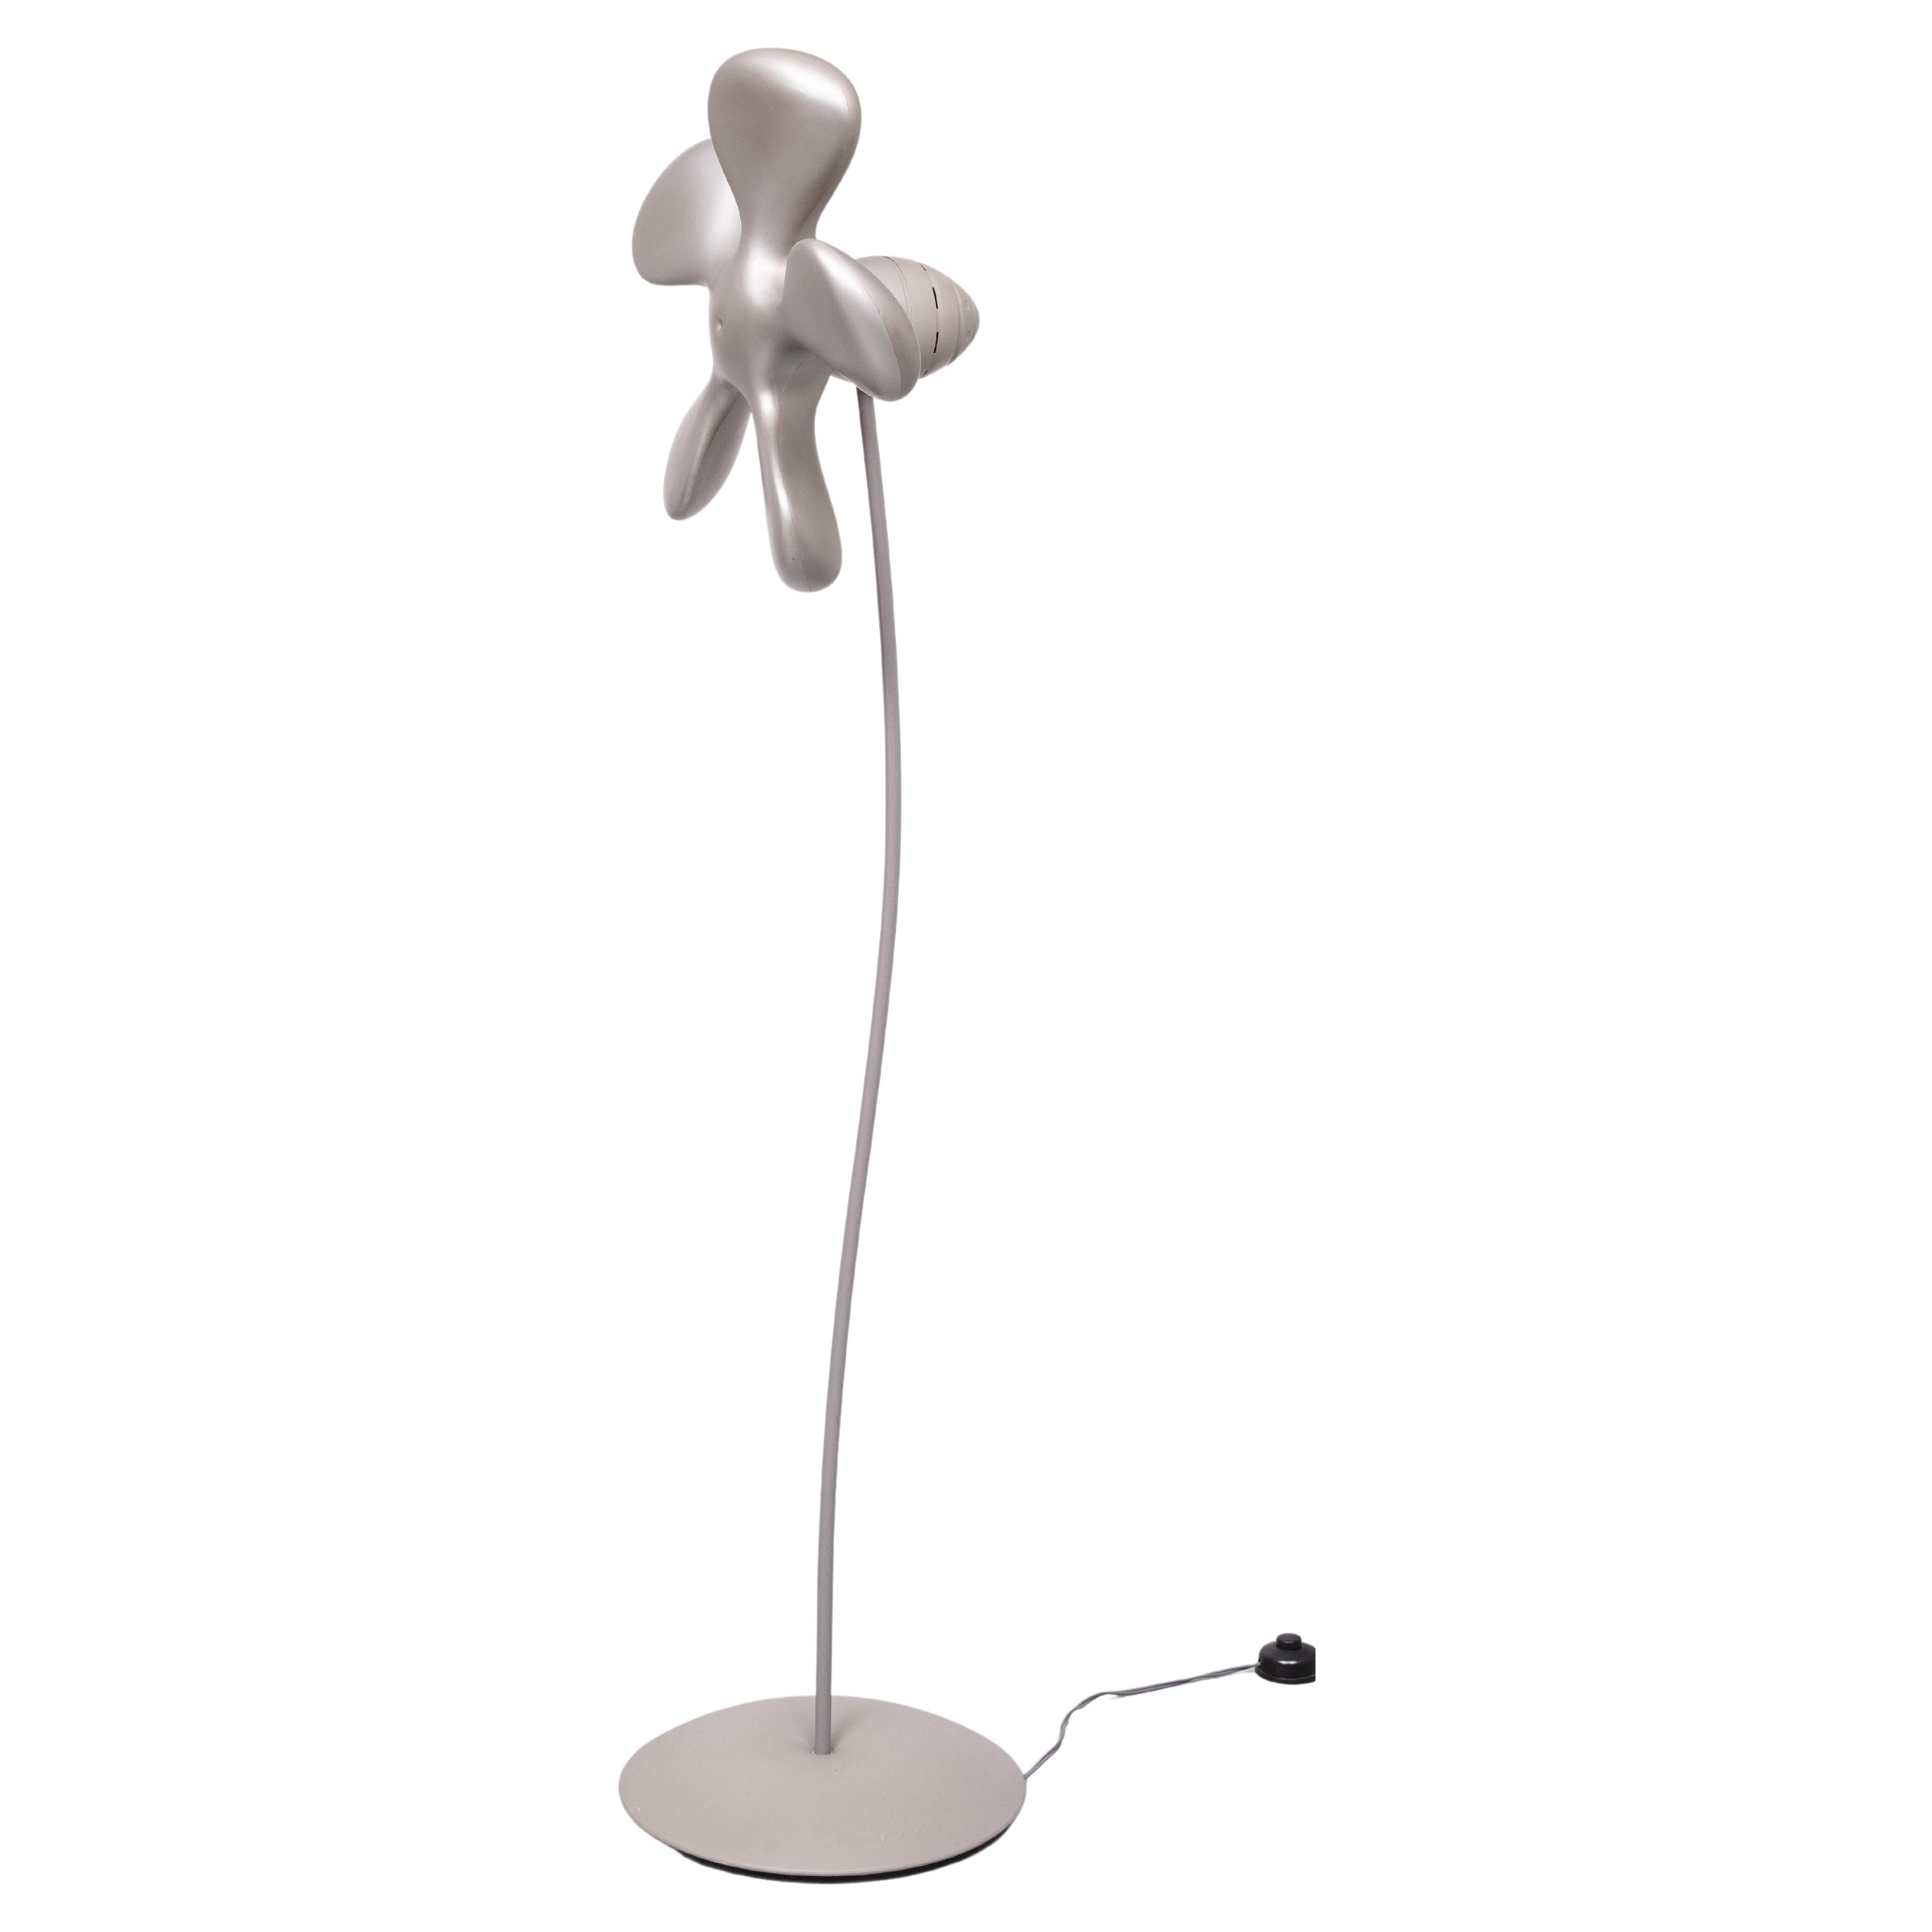 Great looking ,Grey Power Flower Fan by Heckhausen - Zetsche for Elmar Flàtotto in the 2000s.  3-speed engine and automatic blade-stopping safety system - in case of contact. Foam blades and metal structure, the foot is leelined. The paint on the